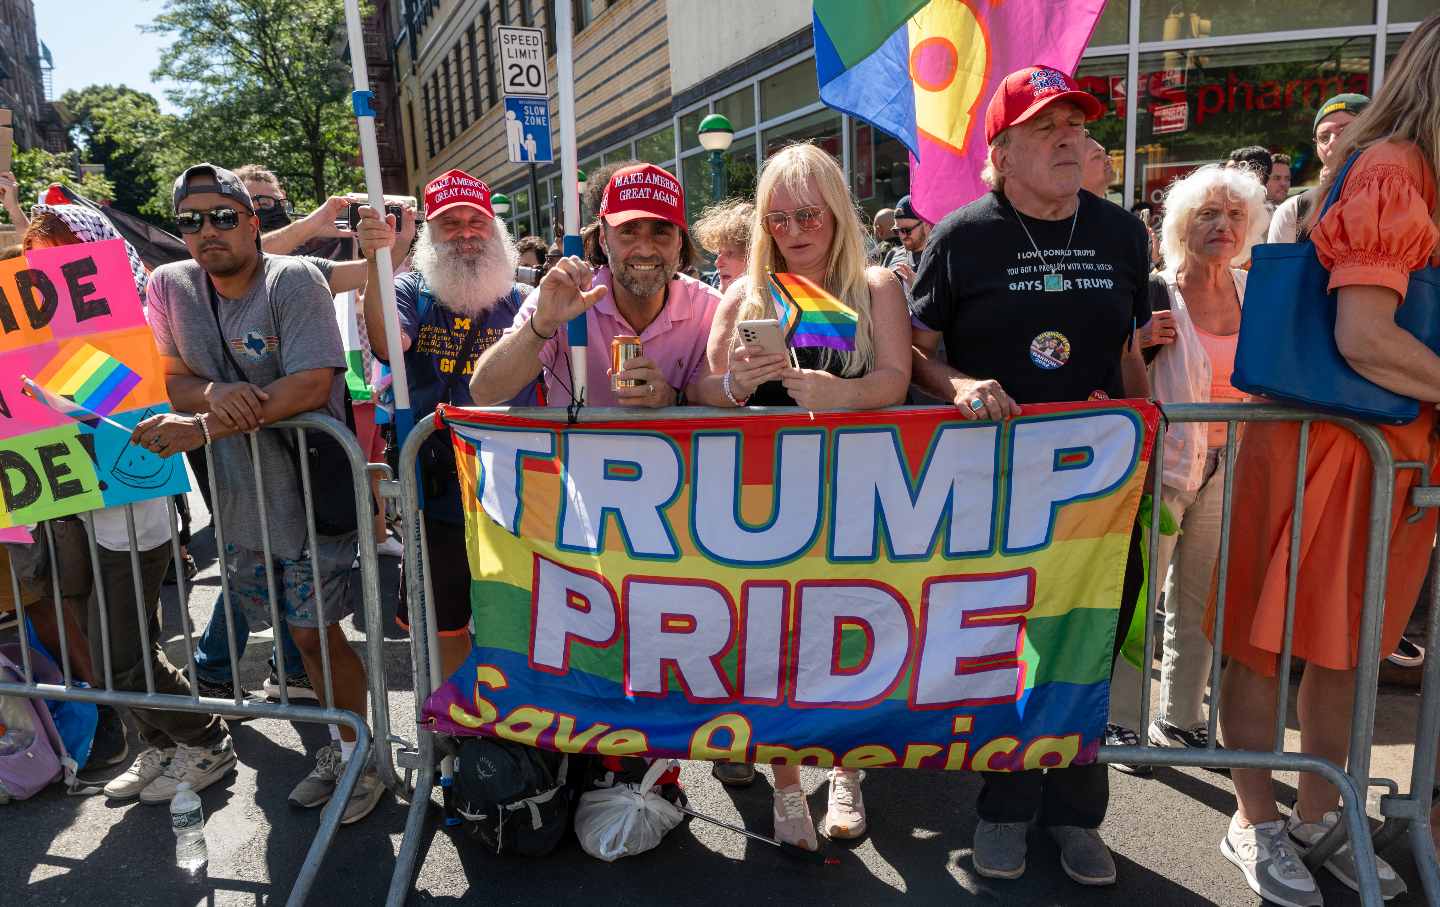 Supporters of Donald Trump gather outside of the Stonewall Inn as President Joe Biden’s motorcade passes by in New York City.